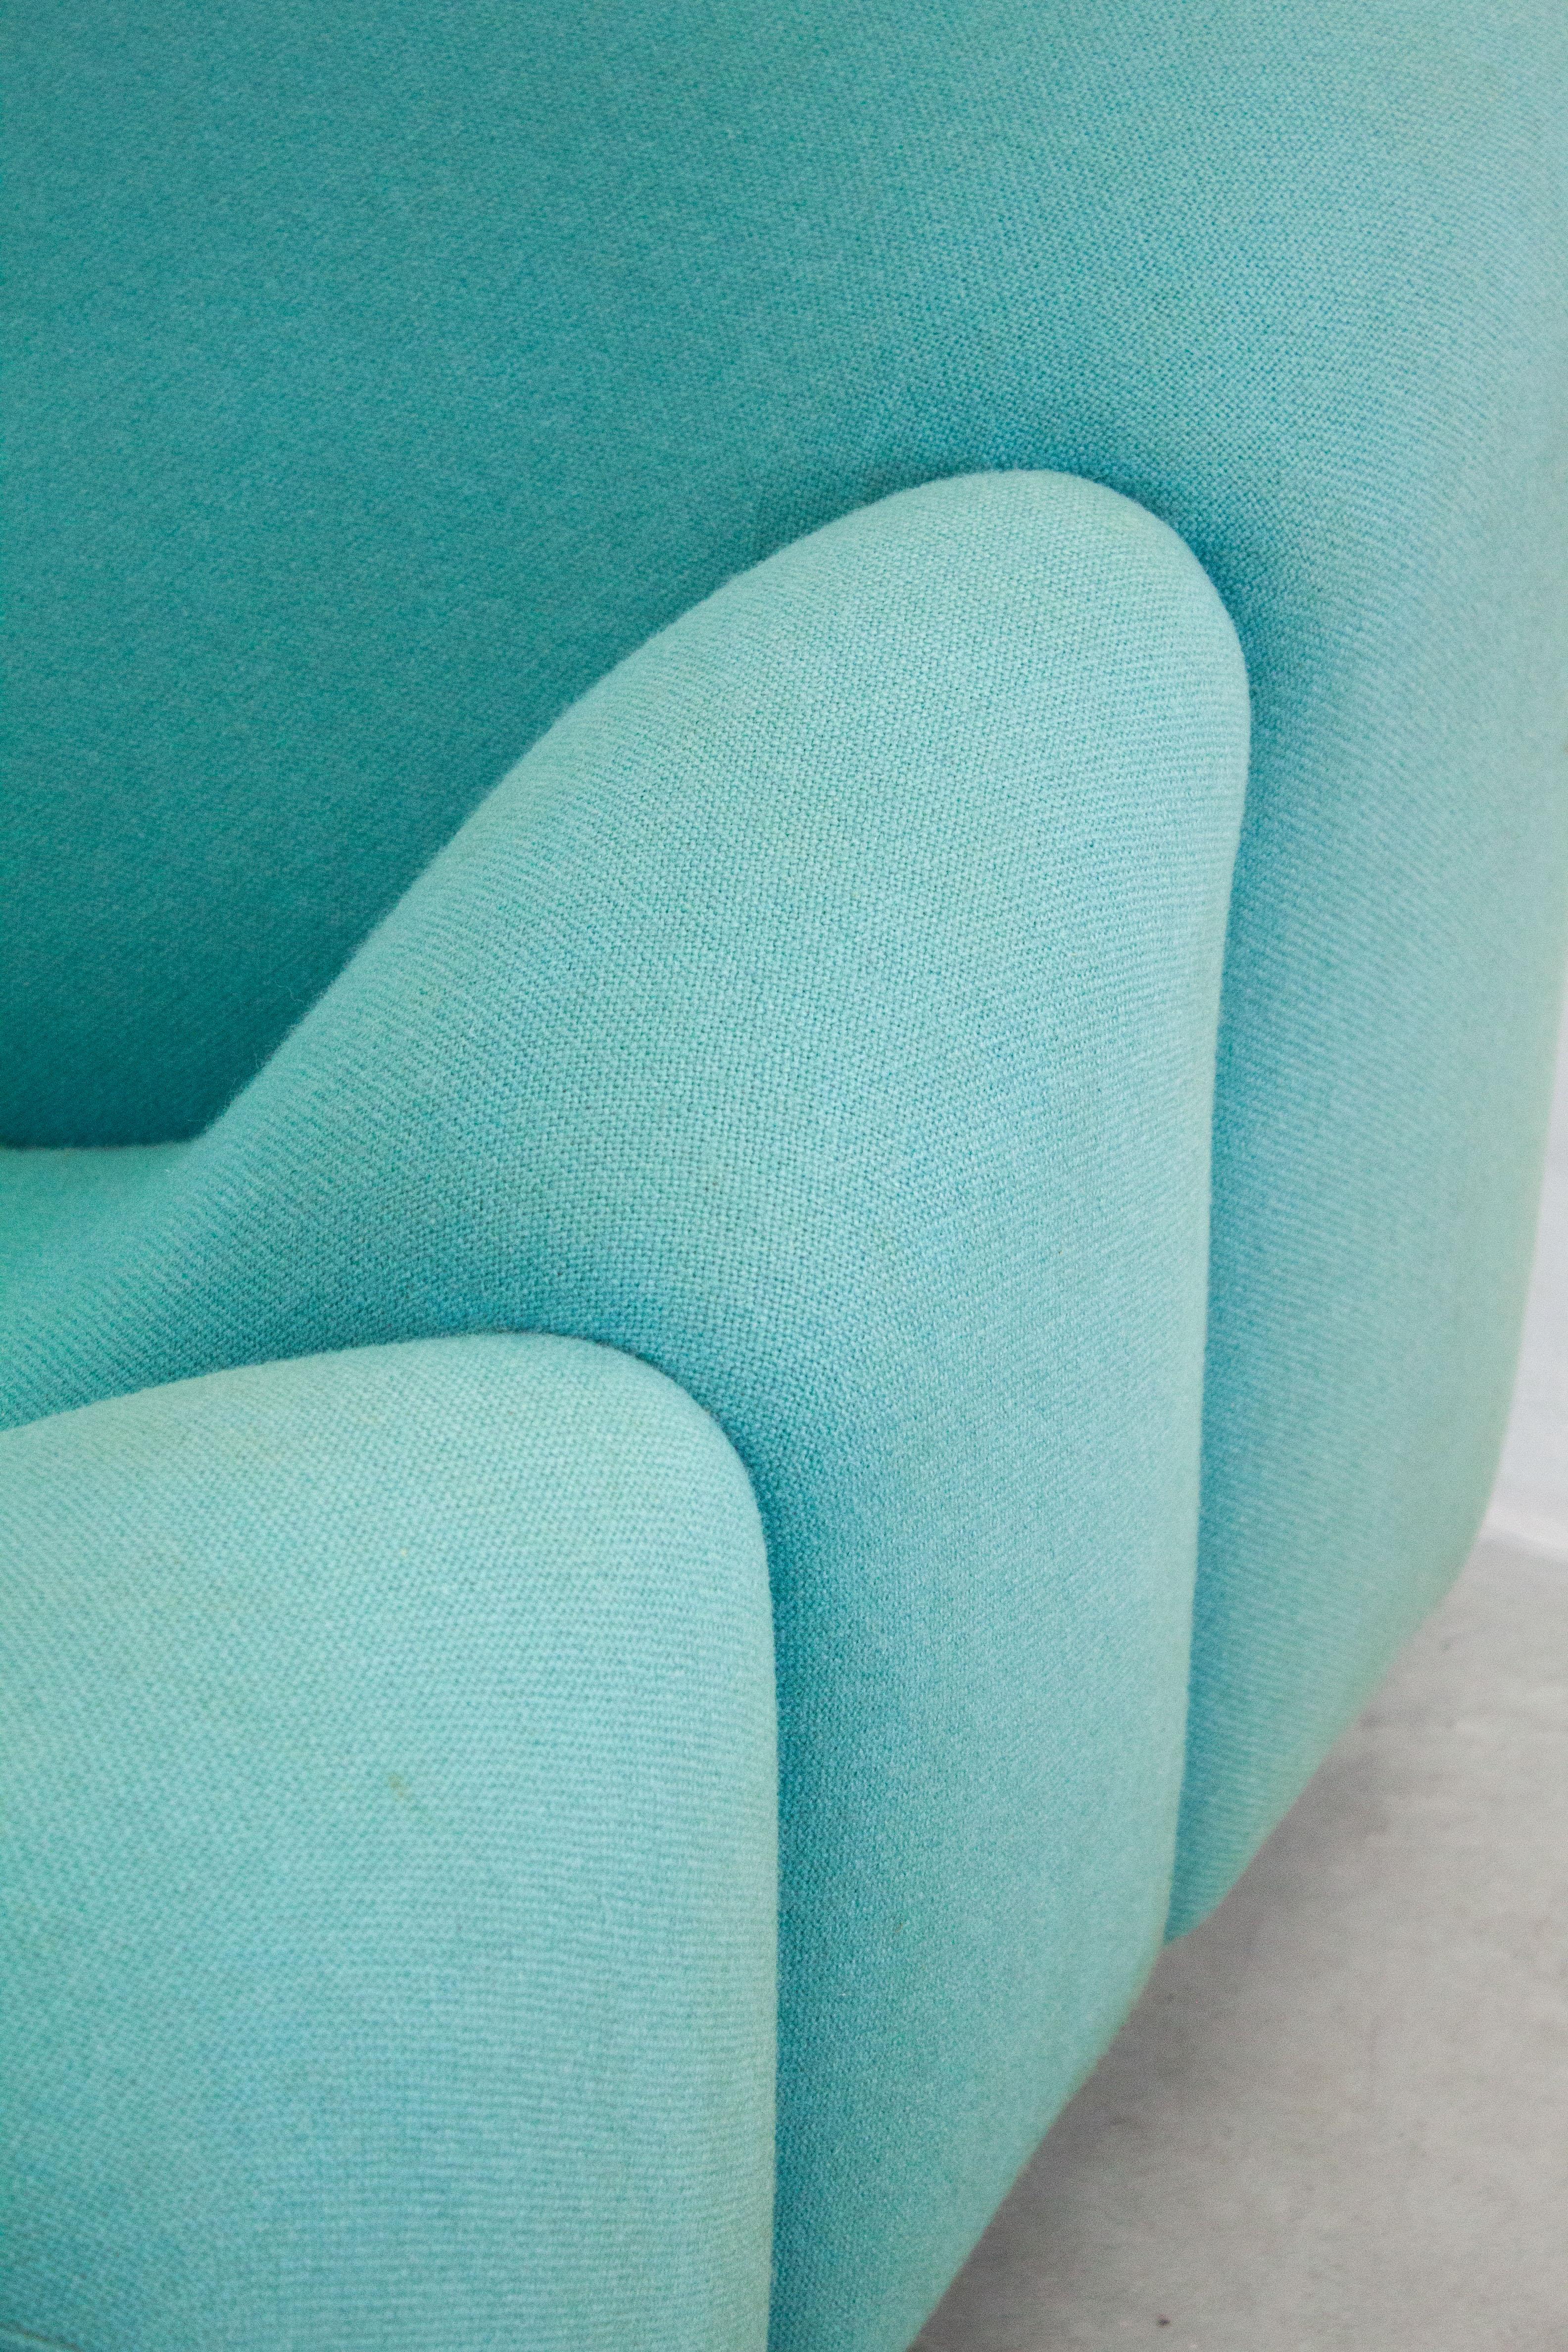 Mid-20th Century Artifort ABCD Lounge Chair by Pierre Paulin (Teal) For Sale